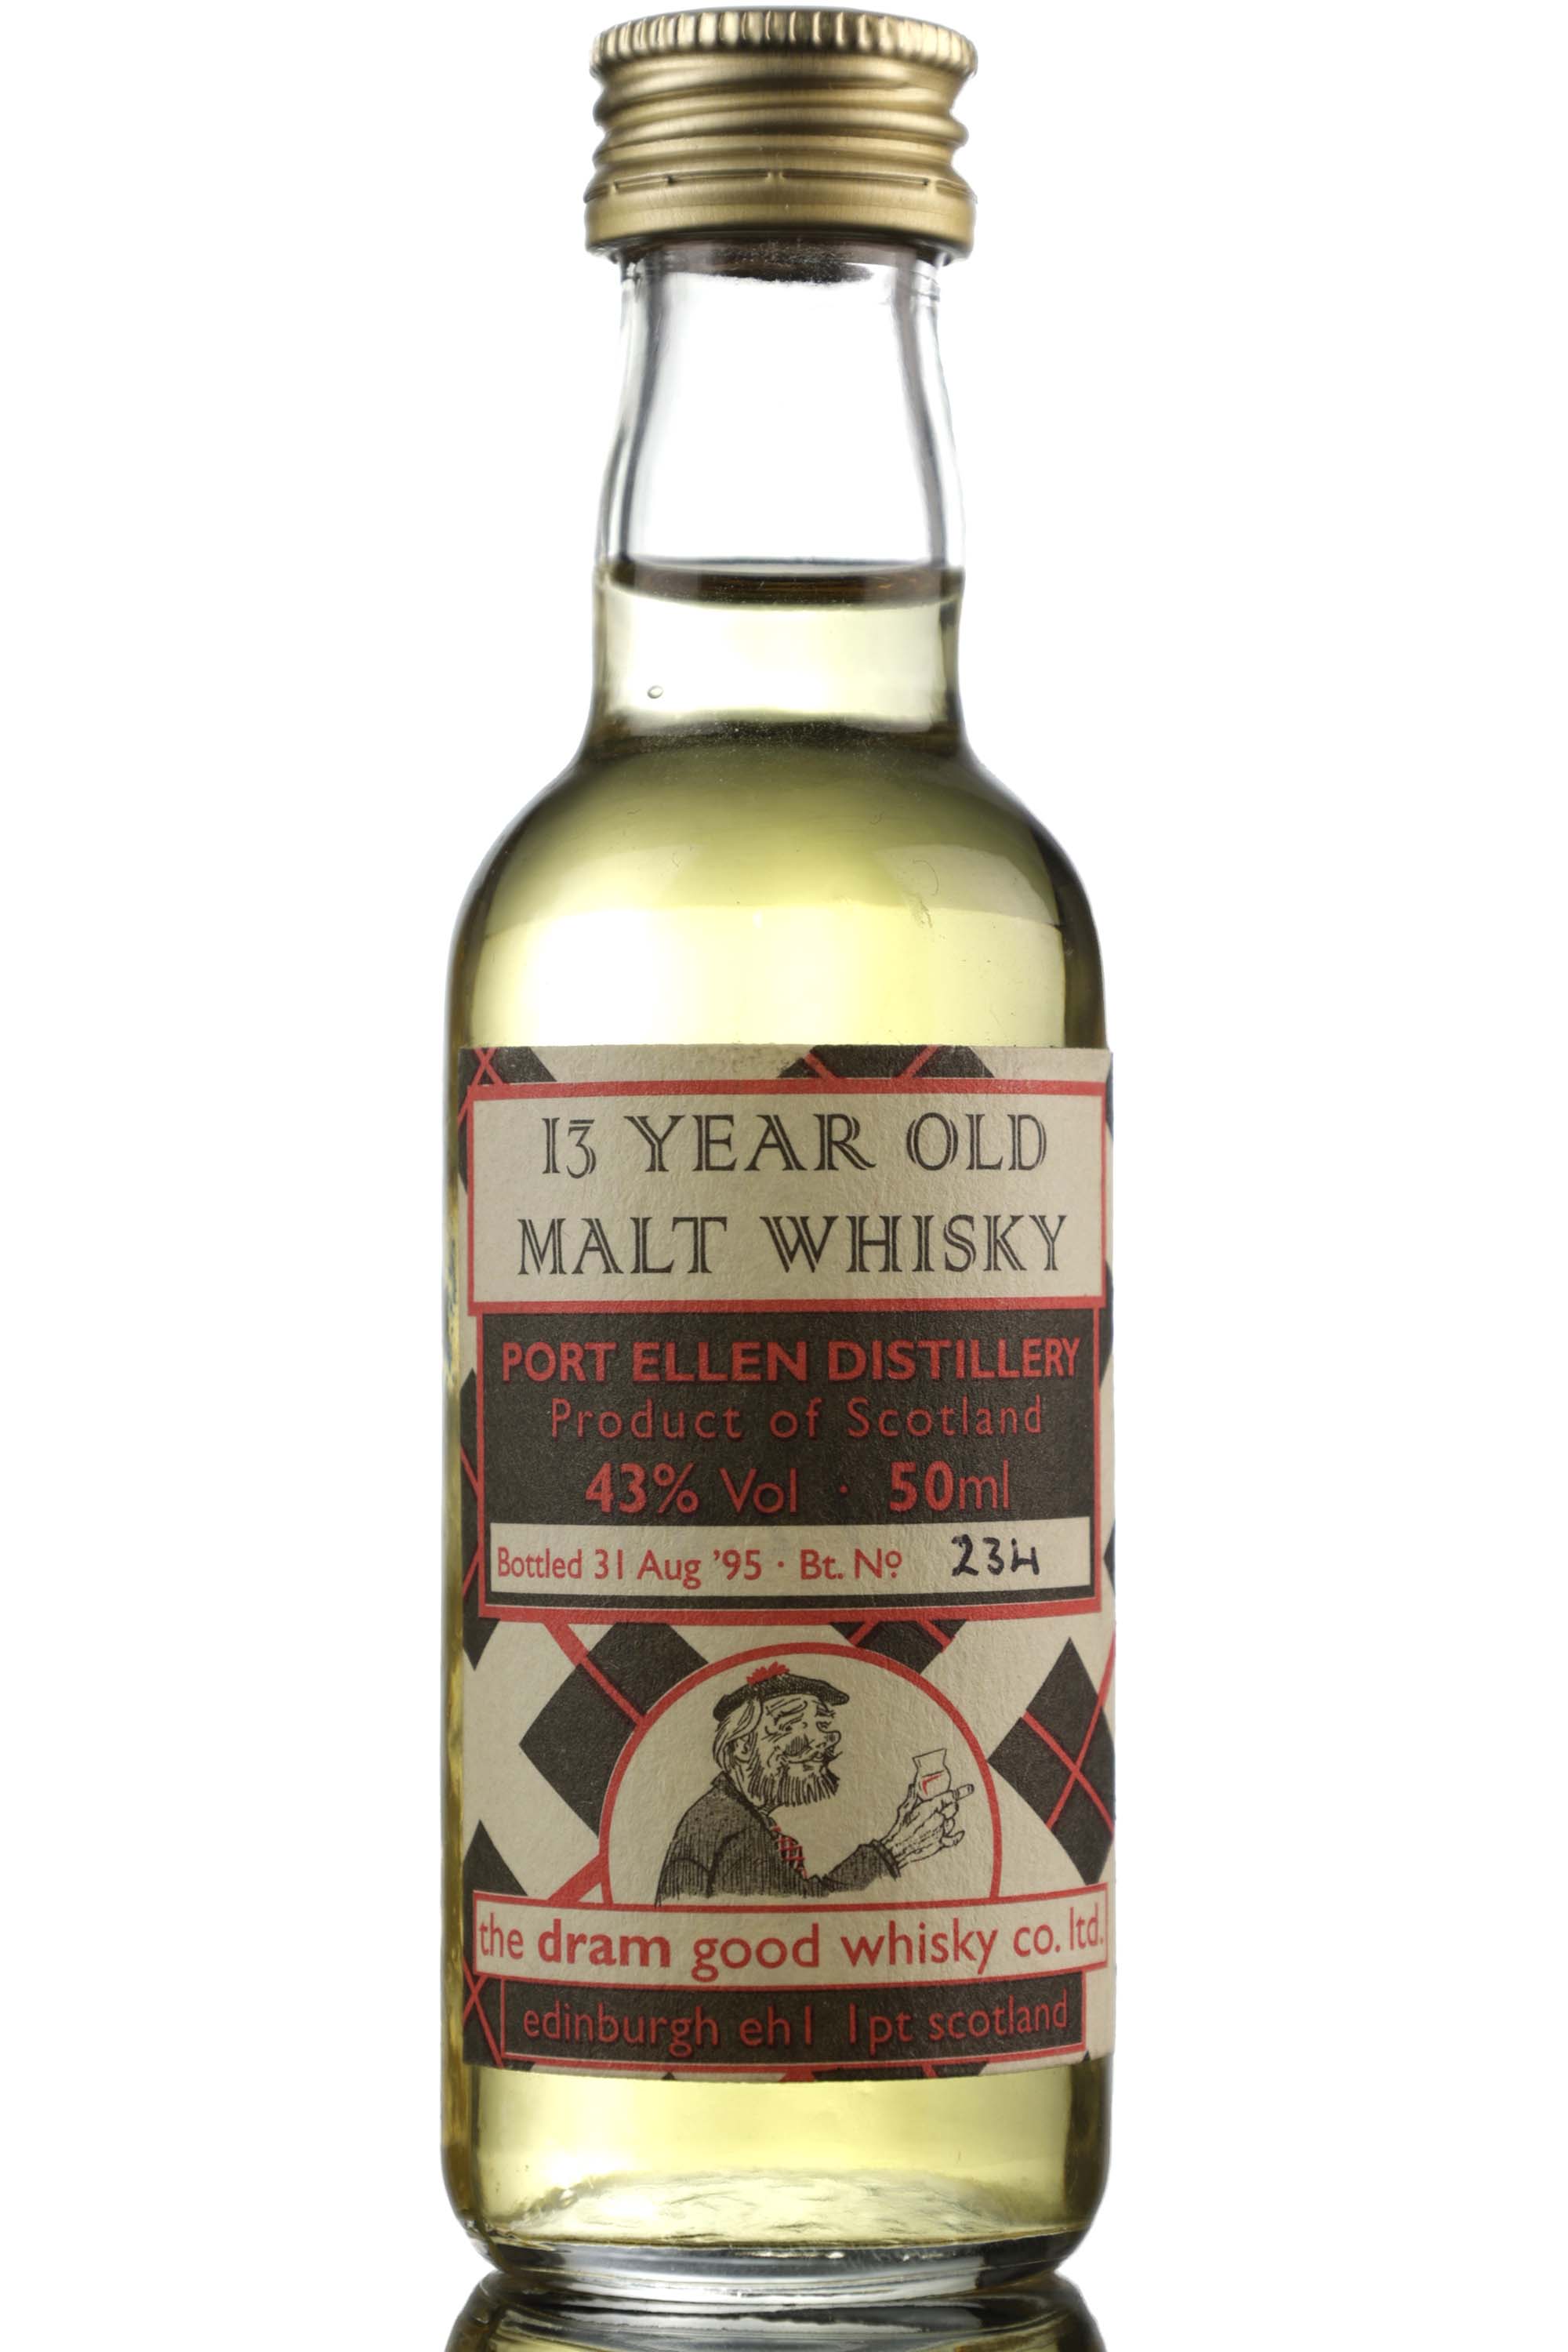 Port Ellen 13 Year Old - The Dram Good Whisky Co - 1995 Release - Miniature